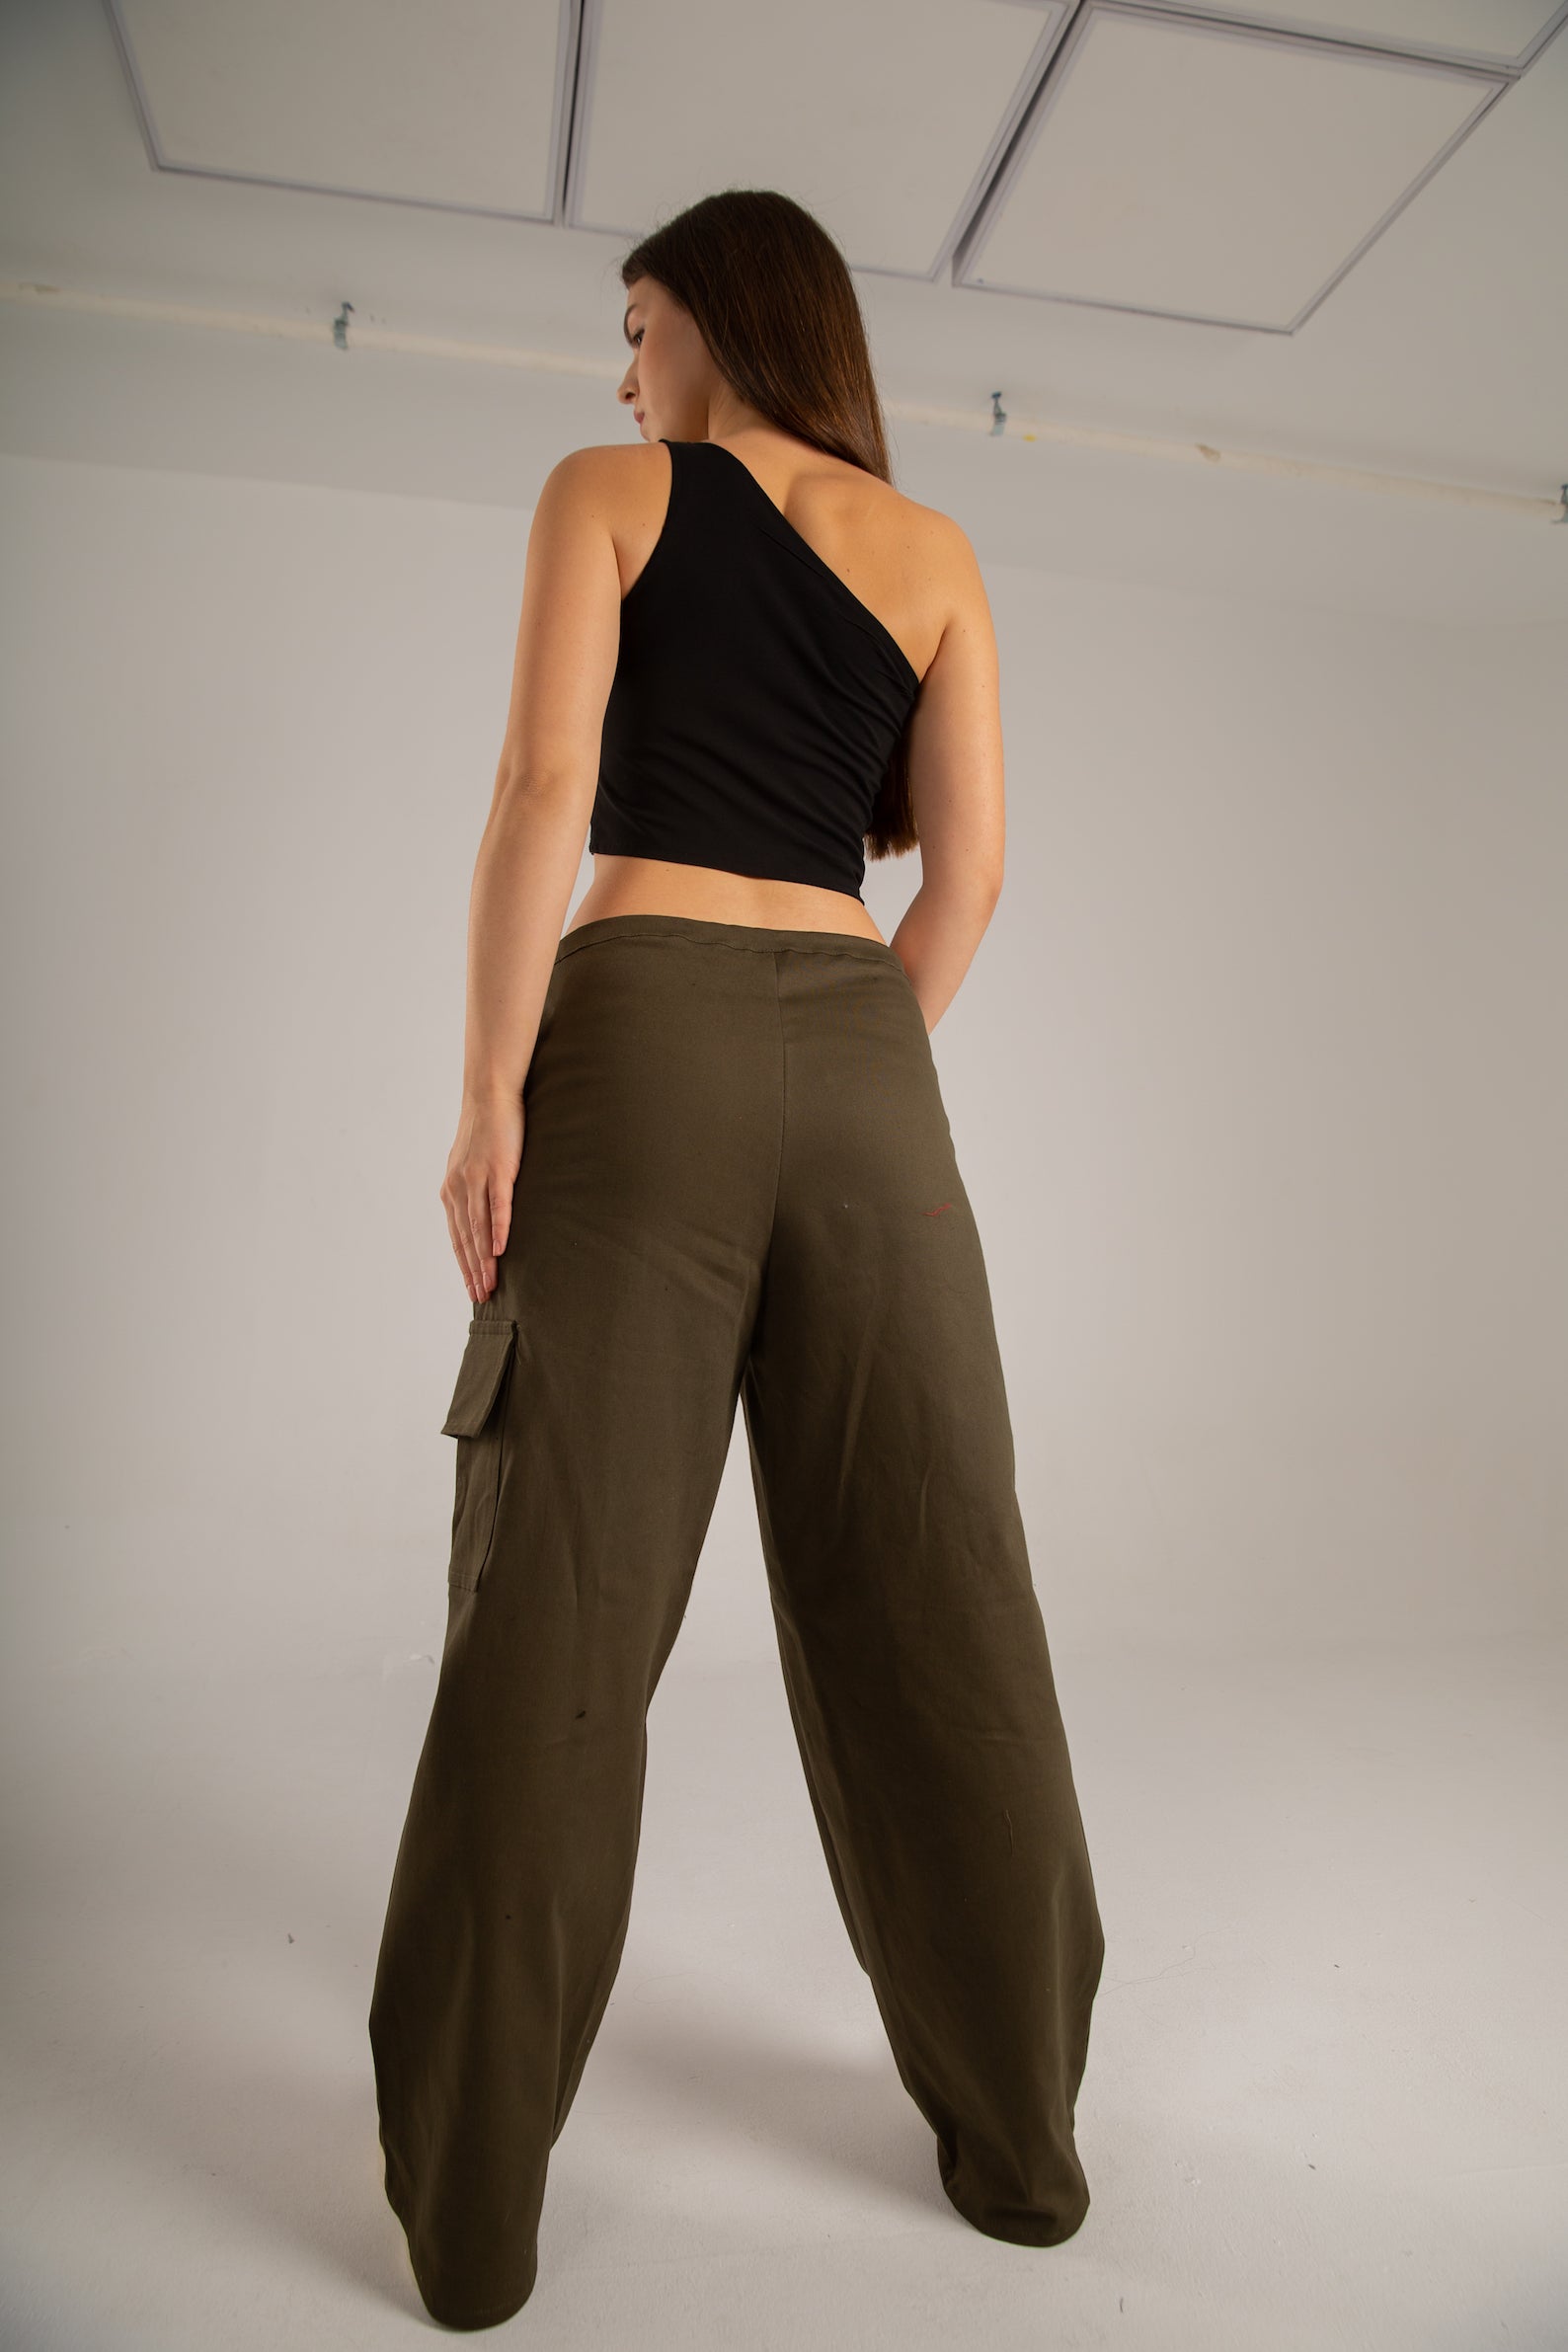 Future pants in olive